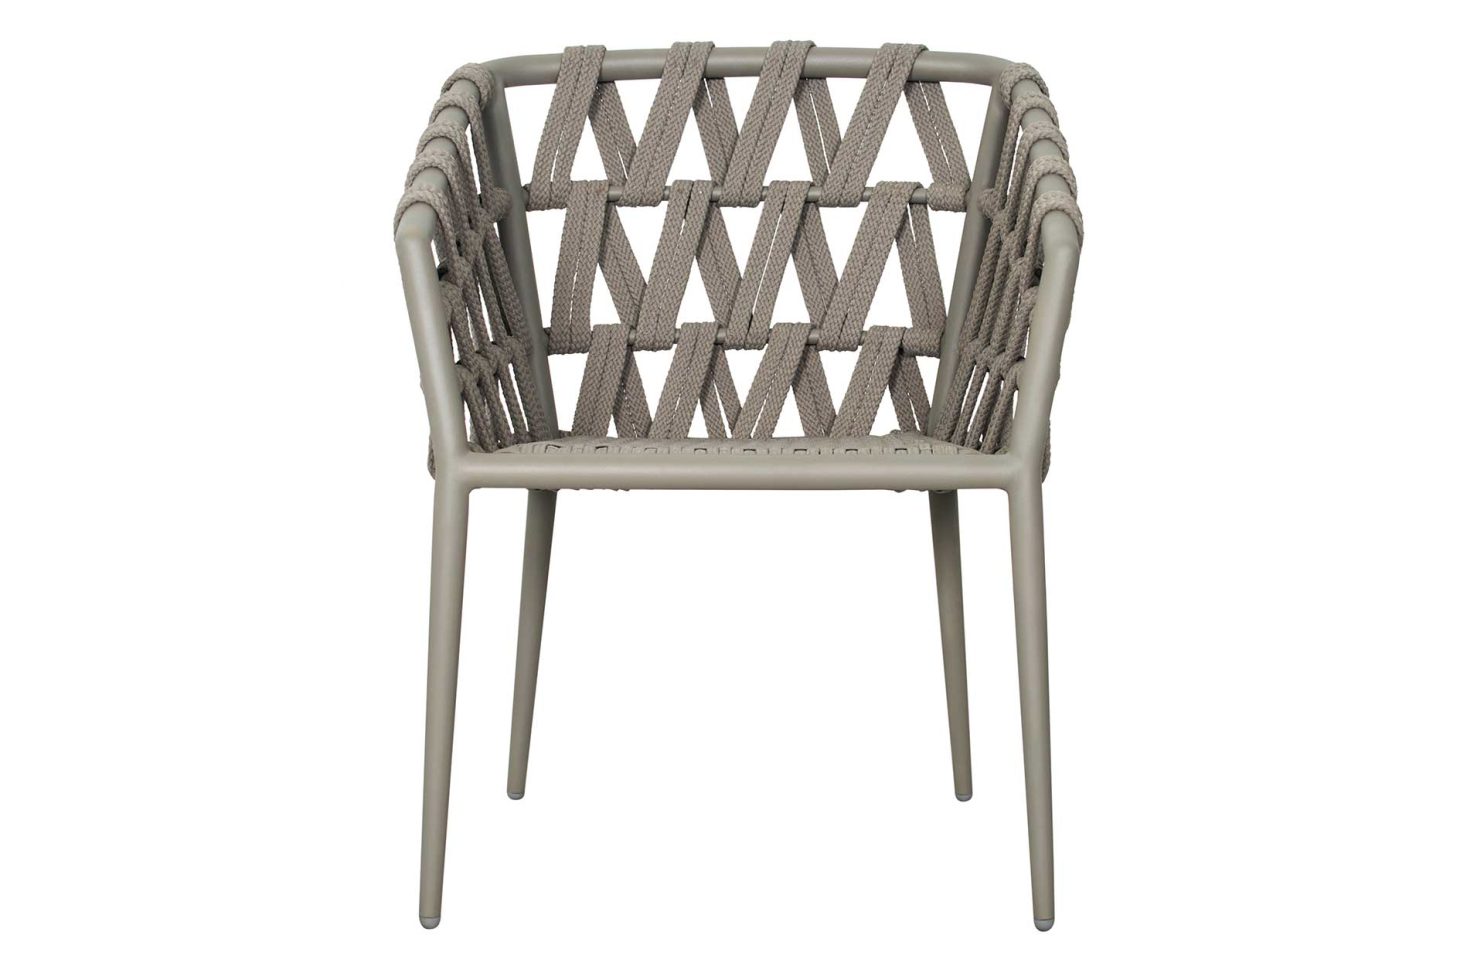 arch andaman dining chair 620FT064P2DG no cushion front web